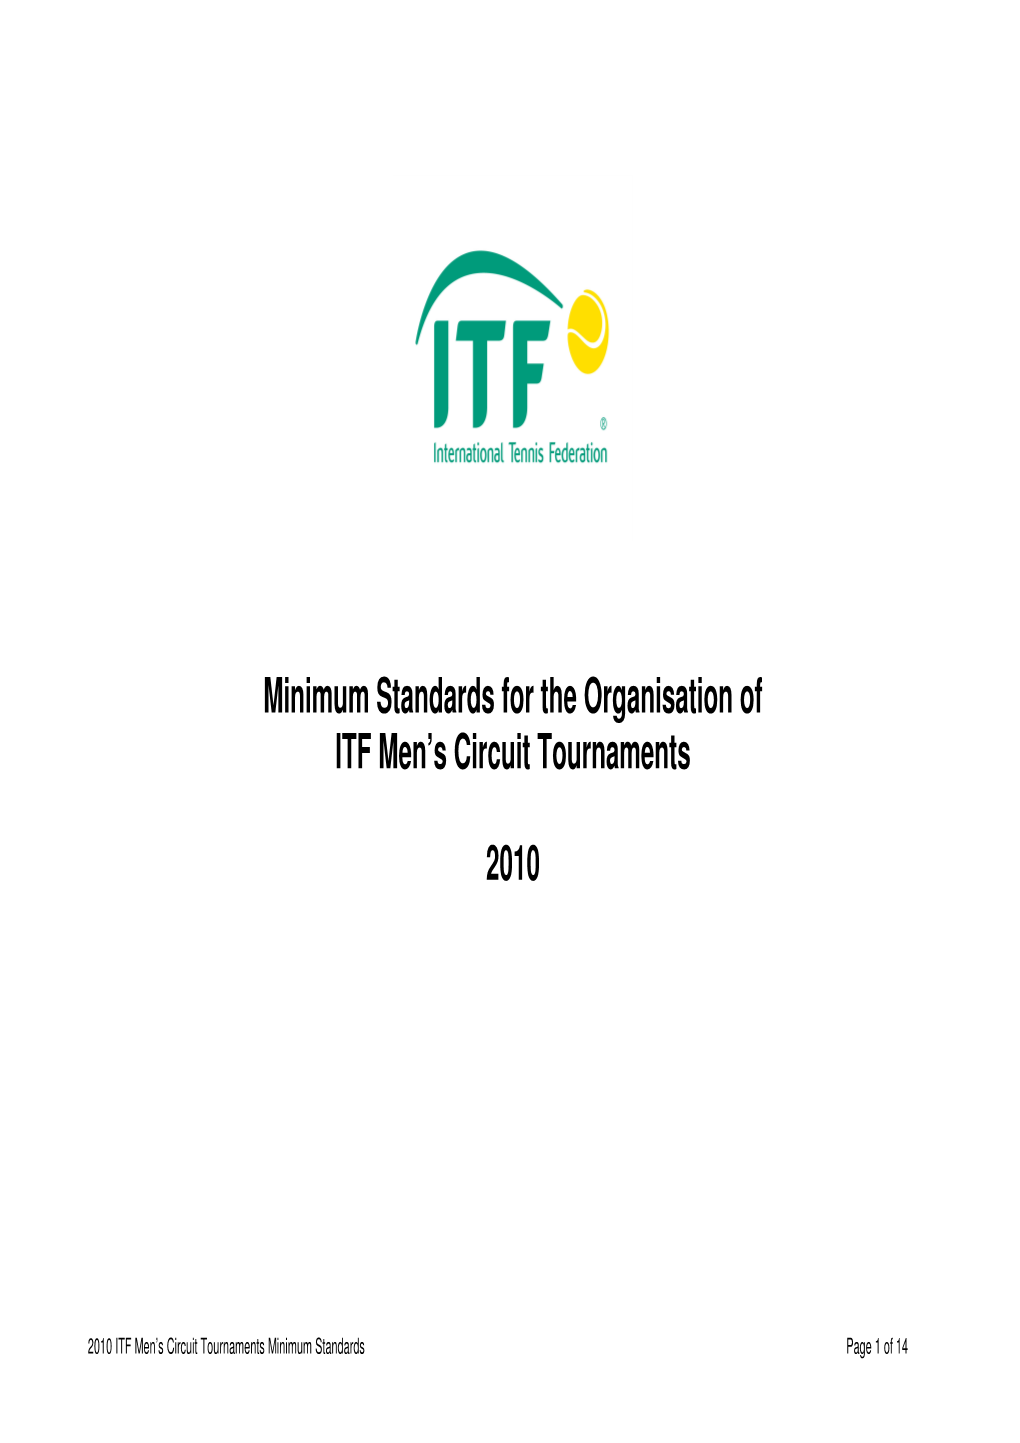 Minimum Standards for the Organisation of ITF Men's Circuit